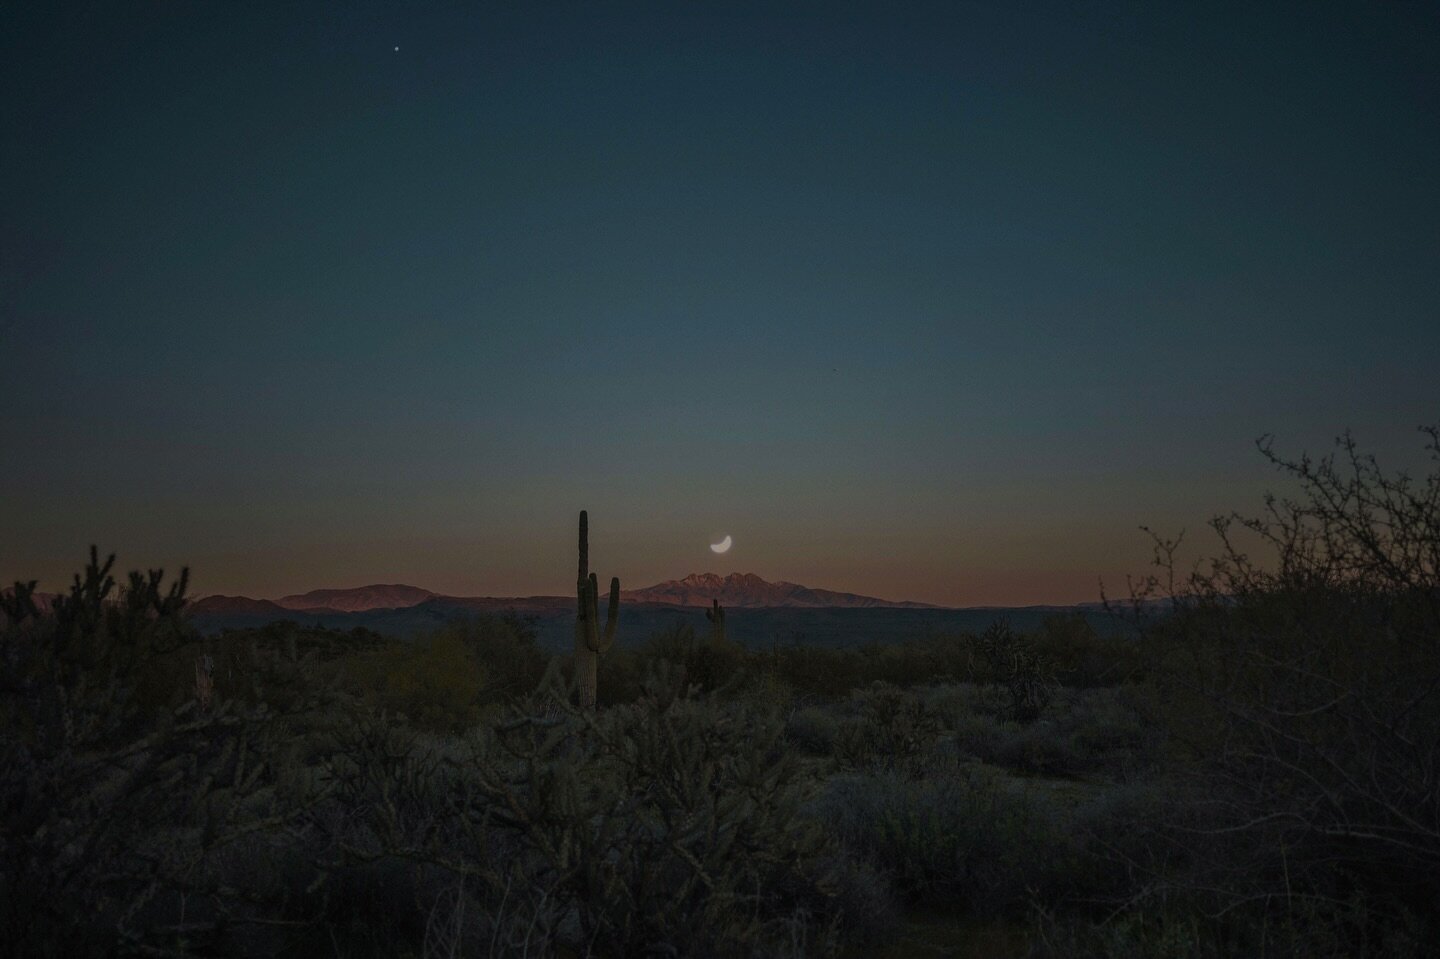 jupiter blessing / moon held with presence : double exposure composite love letter from the sonoran desert on a mardi gras day